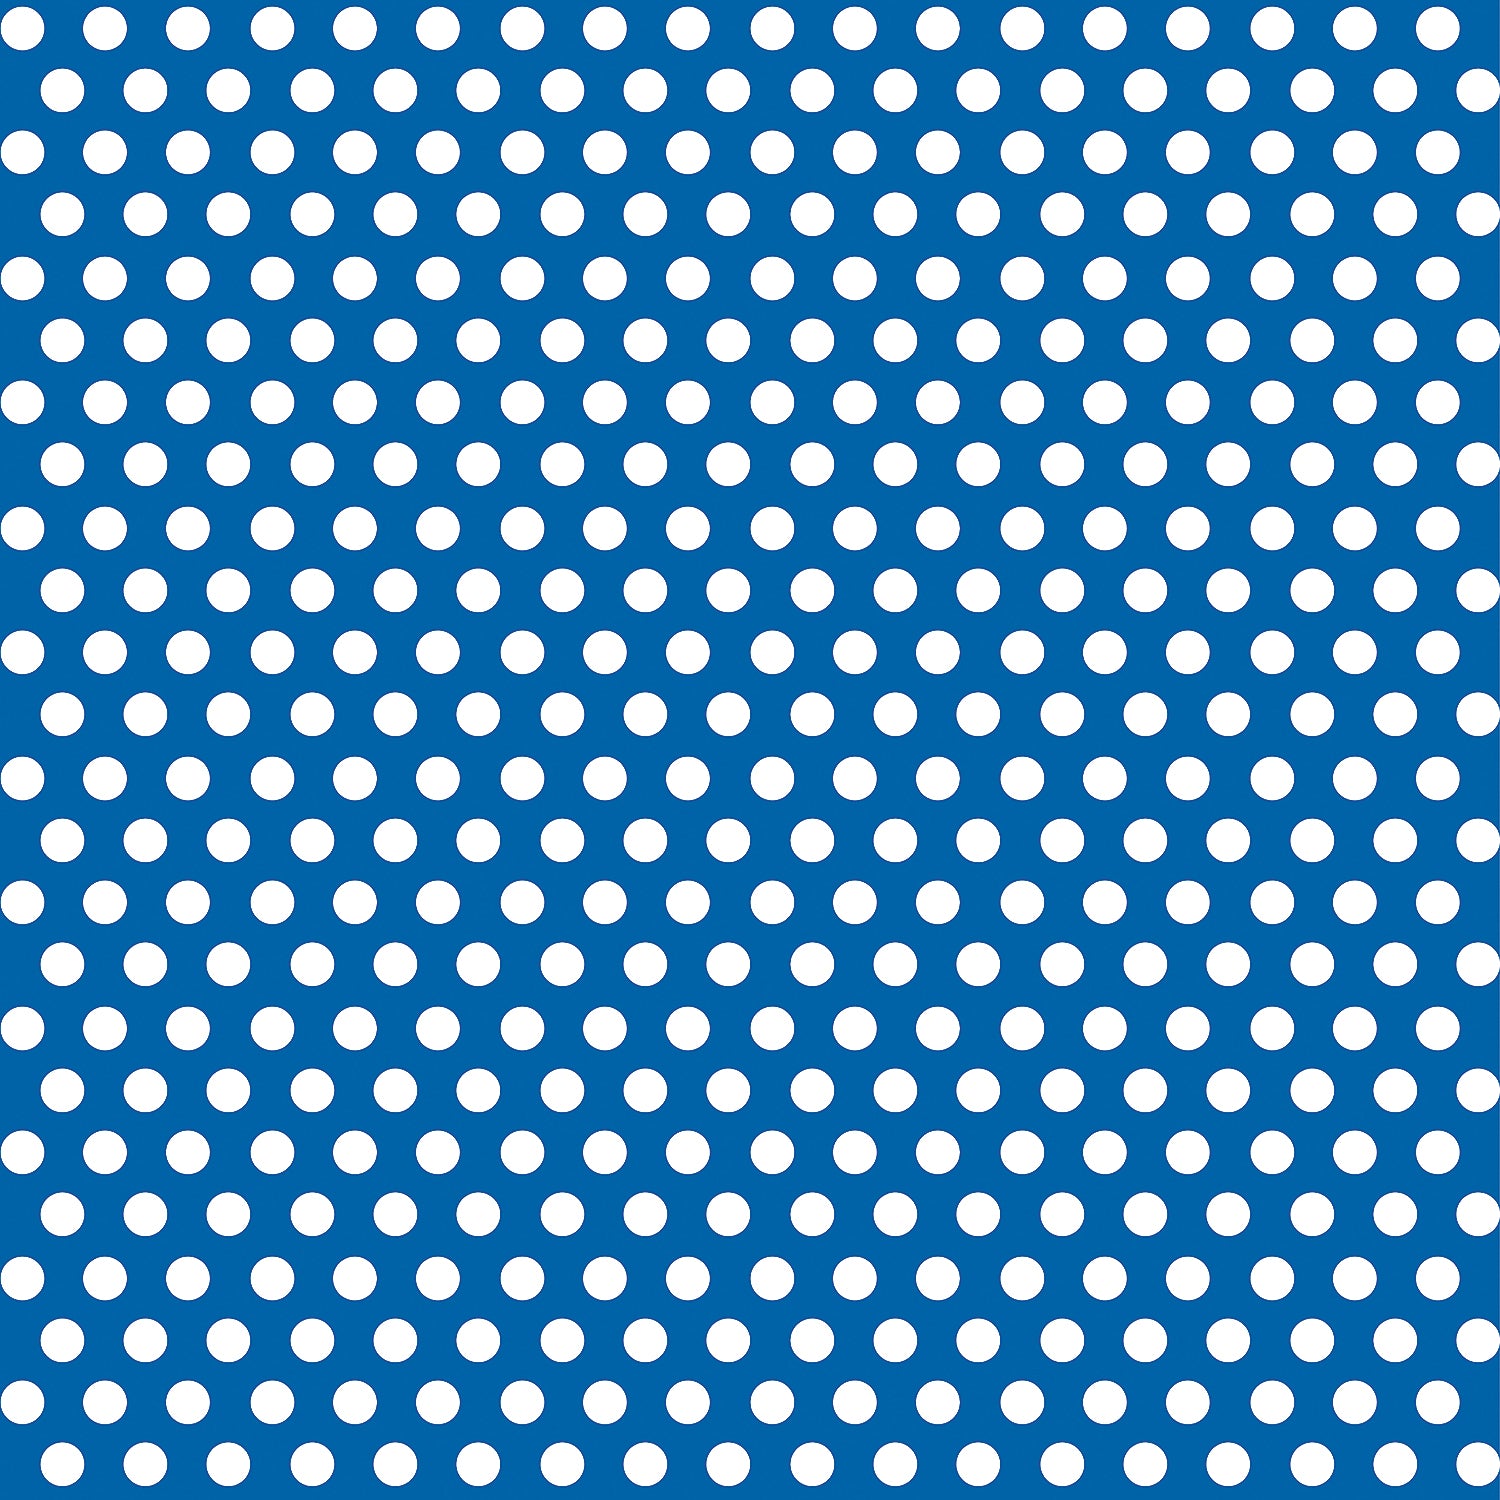 Royal Blue Dots Gift Wrap, 30in x 5ft, 1ct